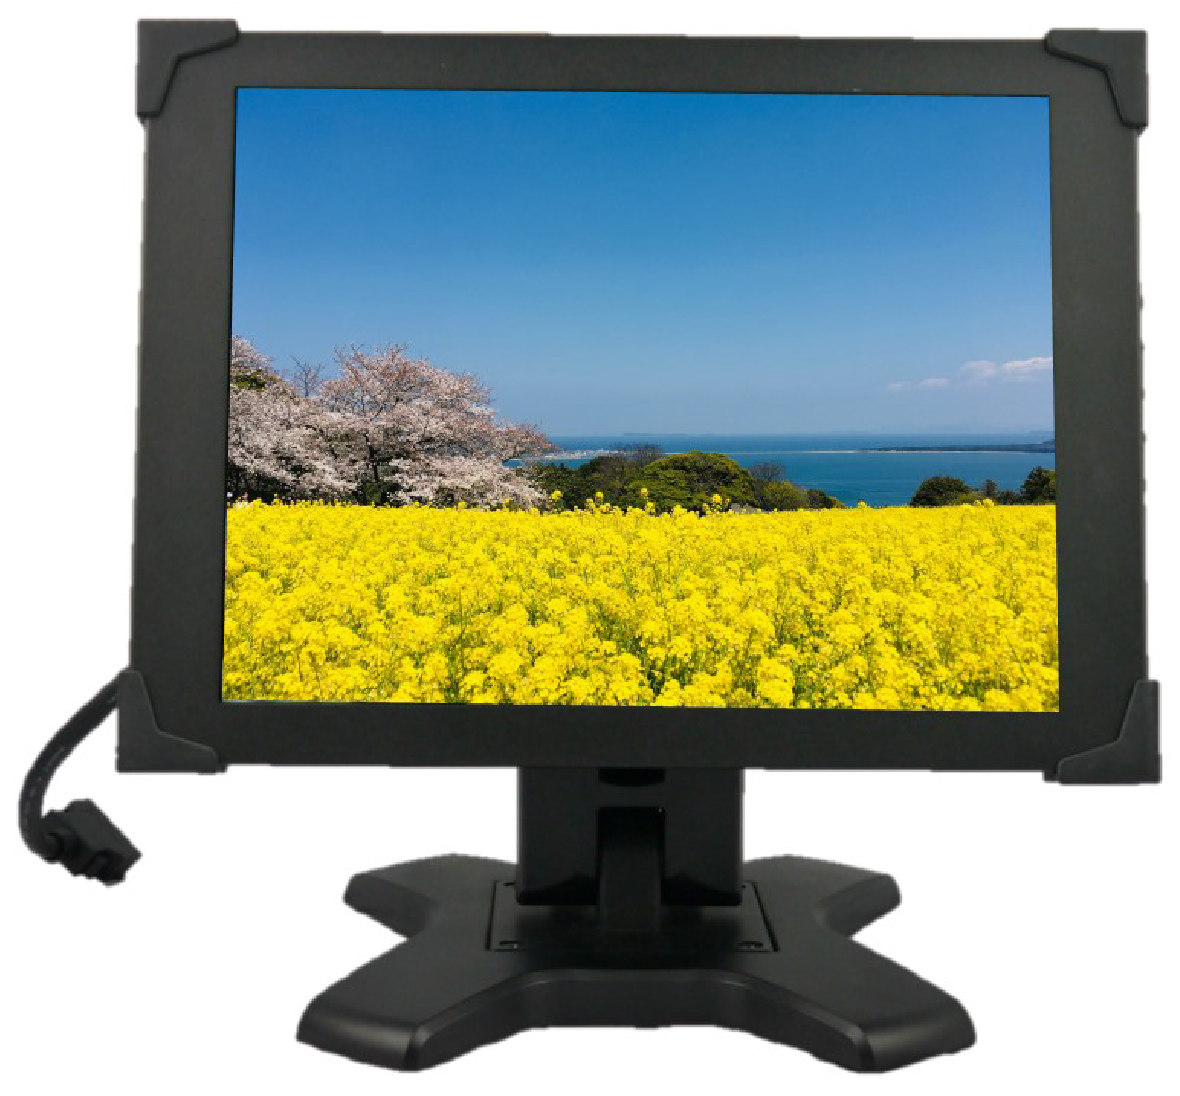 SEF121TPC-PCT-FI is an industrial waterproof touch monitor which can be used to any kinds of vehicles.